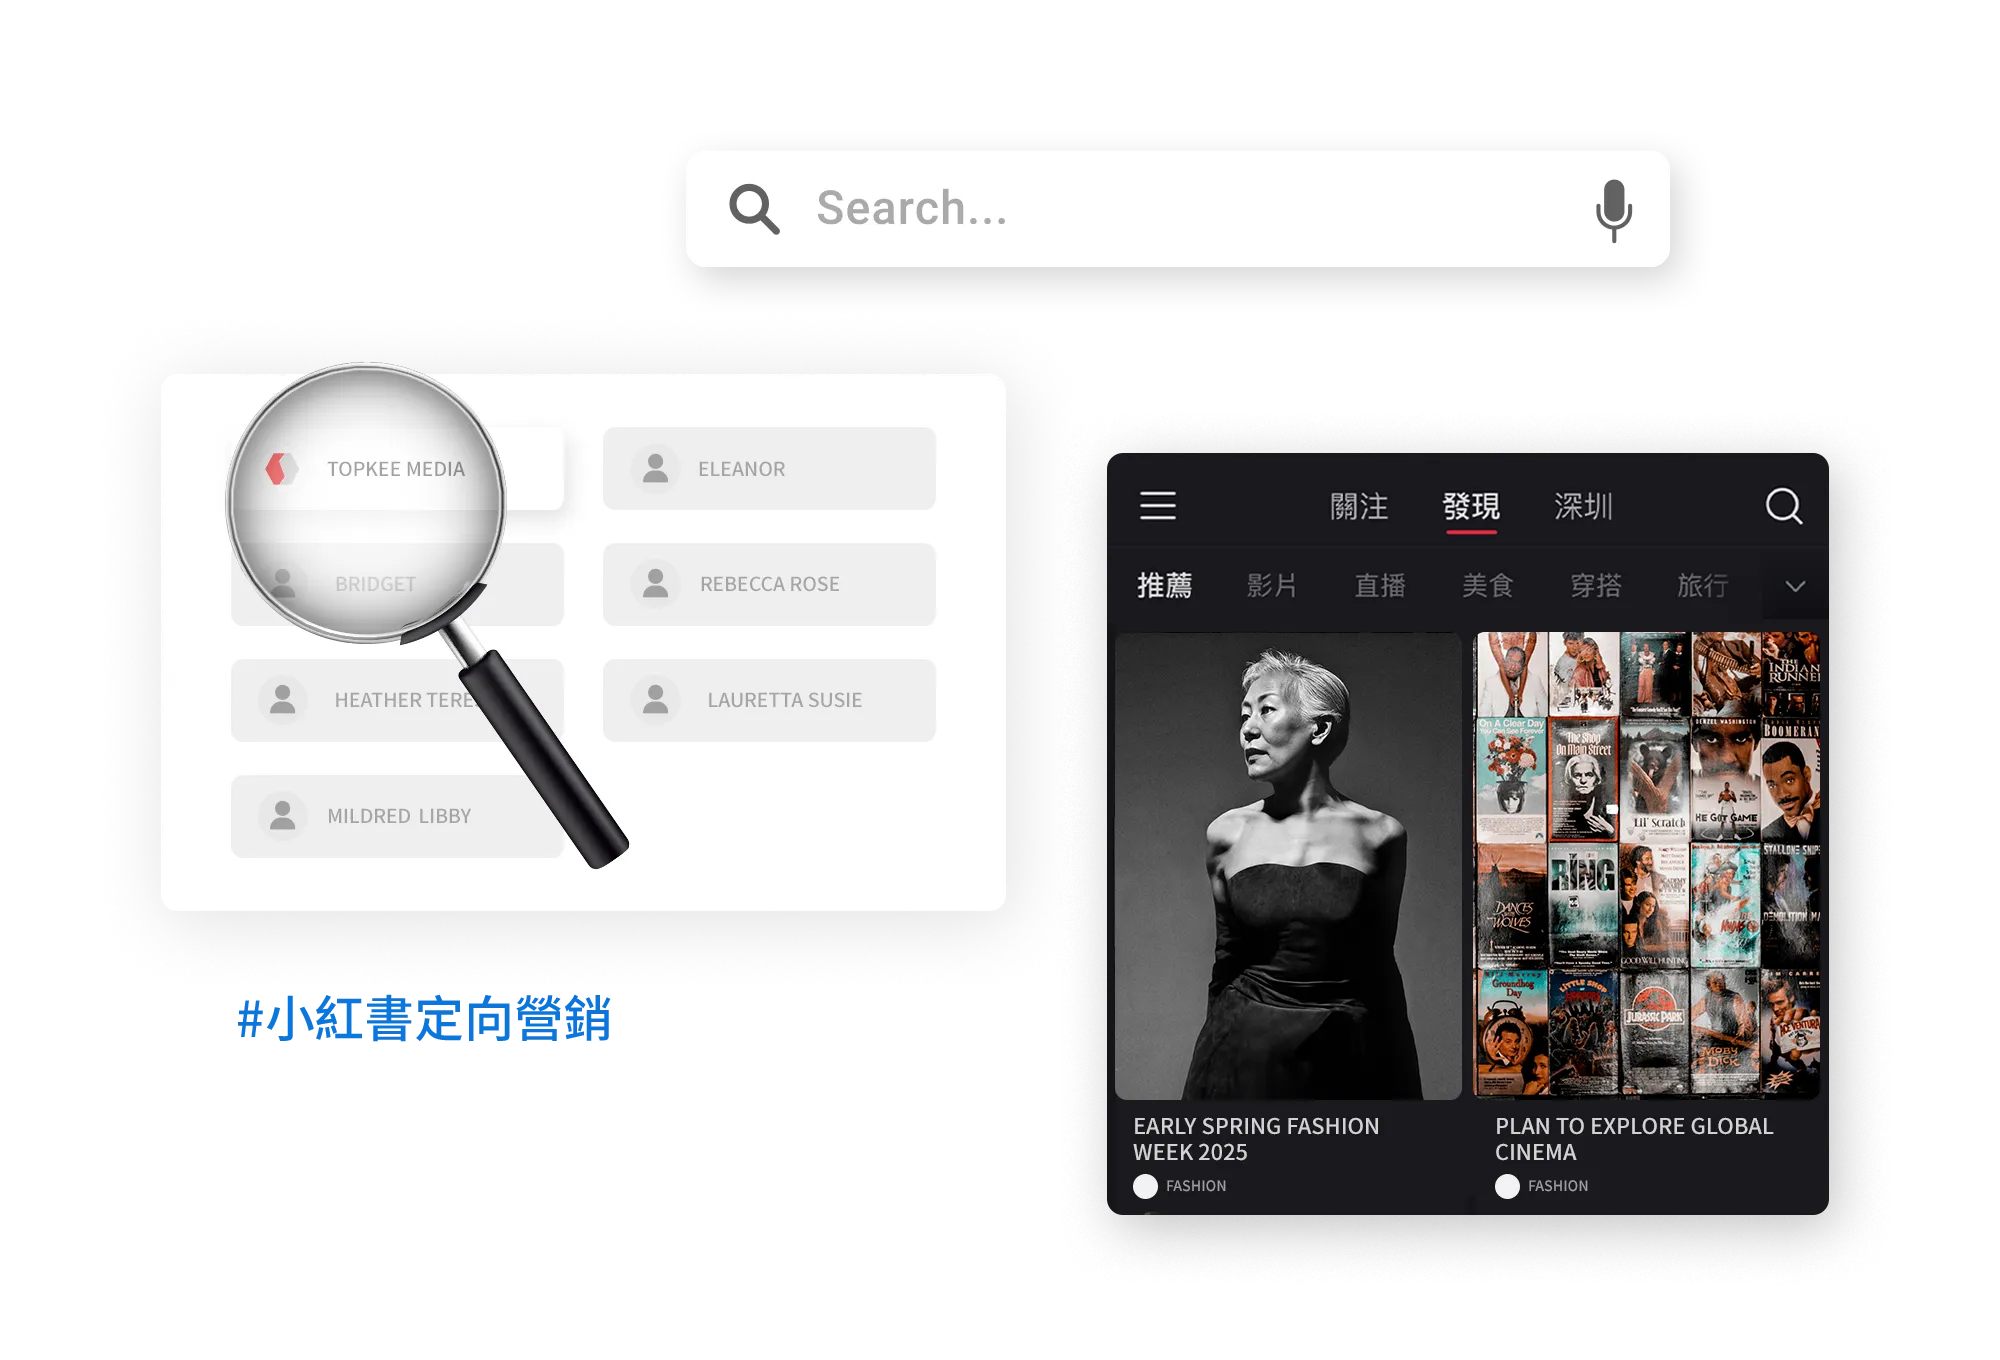 provide refined advertising targeting and achieve precise marketing through Xiaohongshu’s unique DMP system. Combined with multi-dimensional data sources such as user attributes, life stages, and shopping habits, we use the three major strategies of general investment, intelligent targeting, and customization to ensure that ads reach the most appropriate target groups.